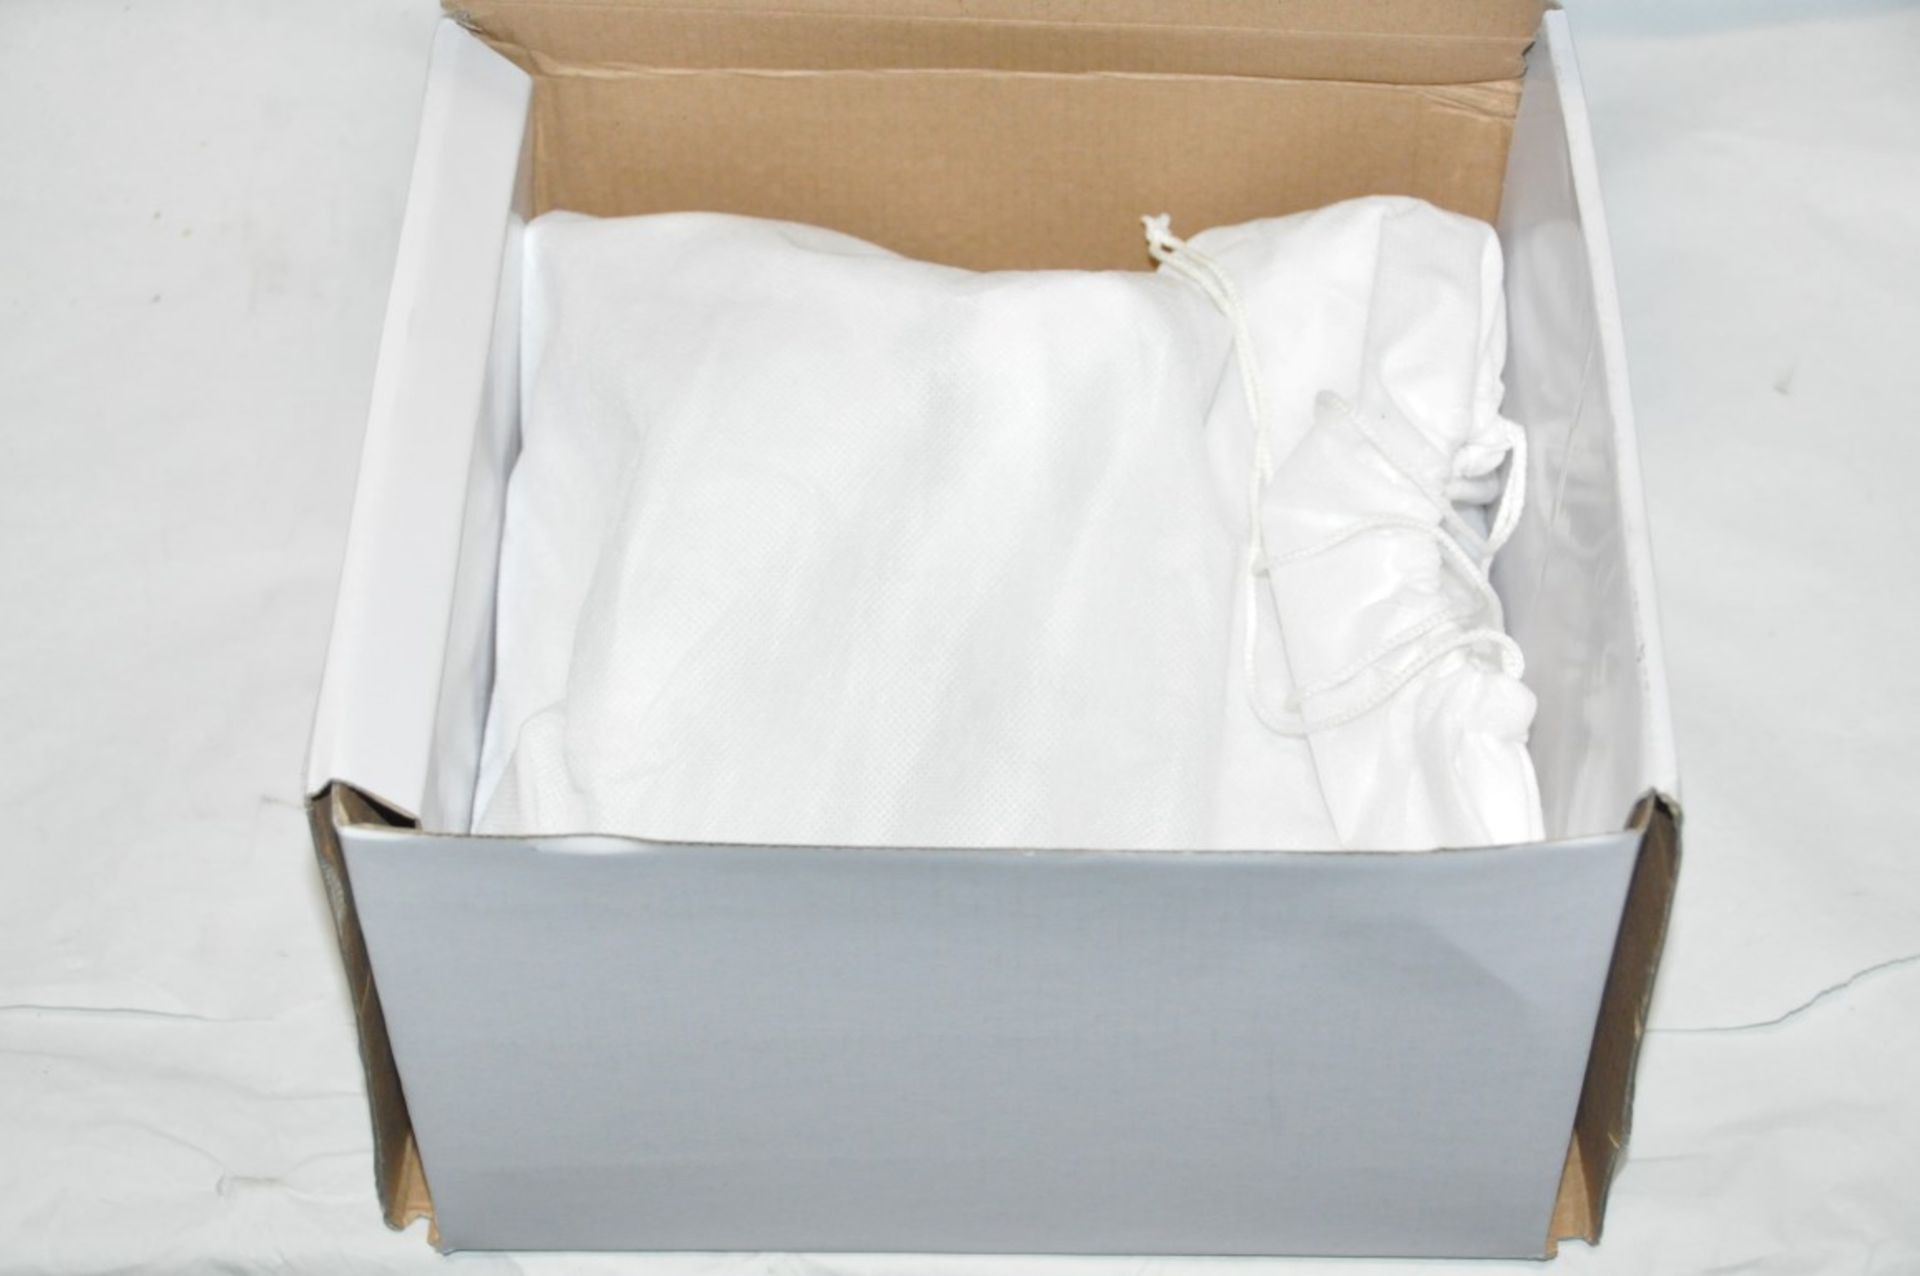 1 x Chrome Bath Filler – Used Commercial Samples - Boxed in Good Condition – No Fittings - Model : - Image 5 of 5